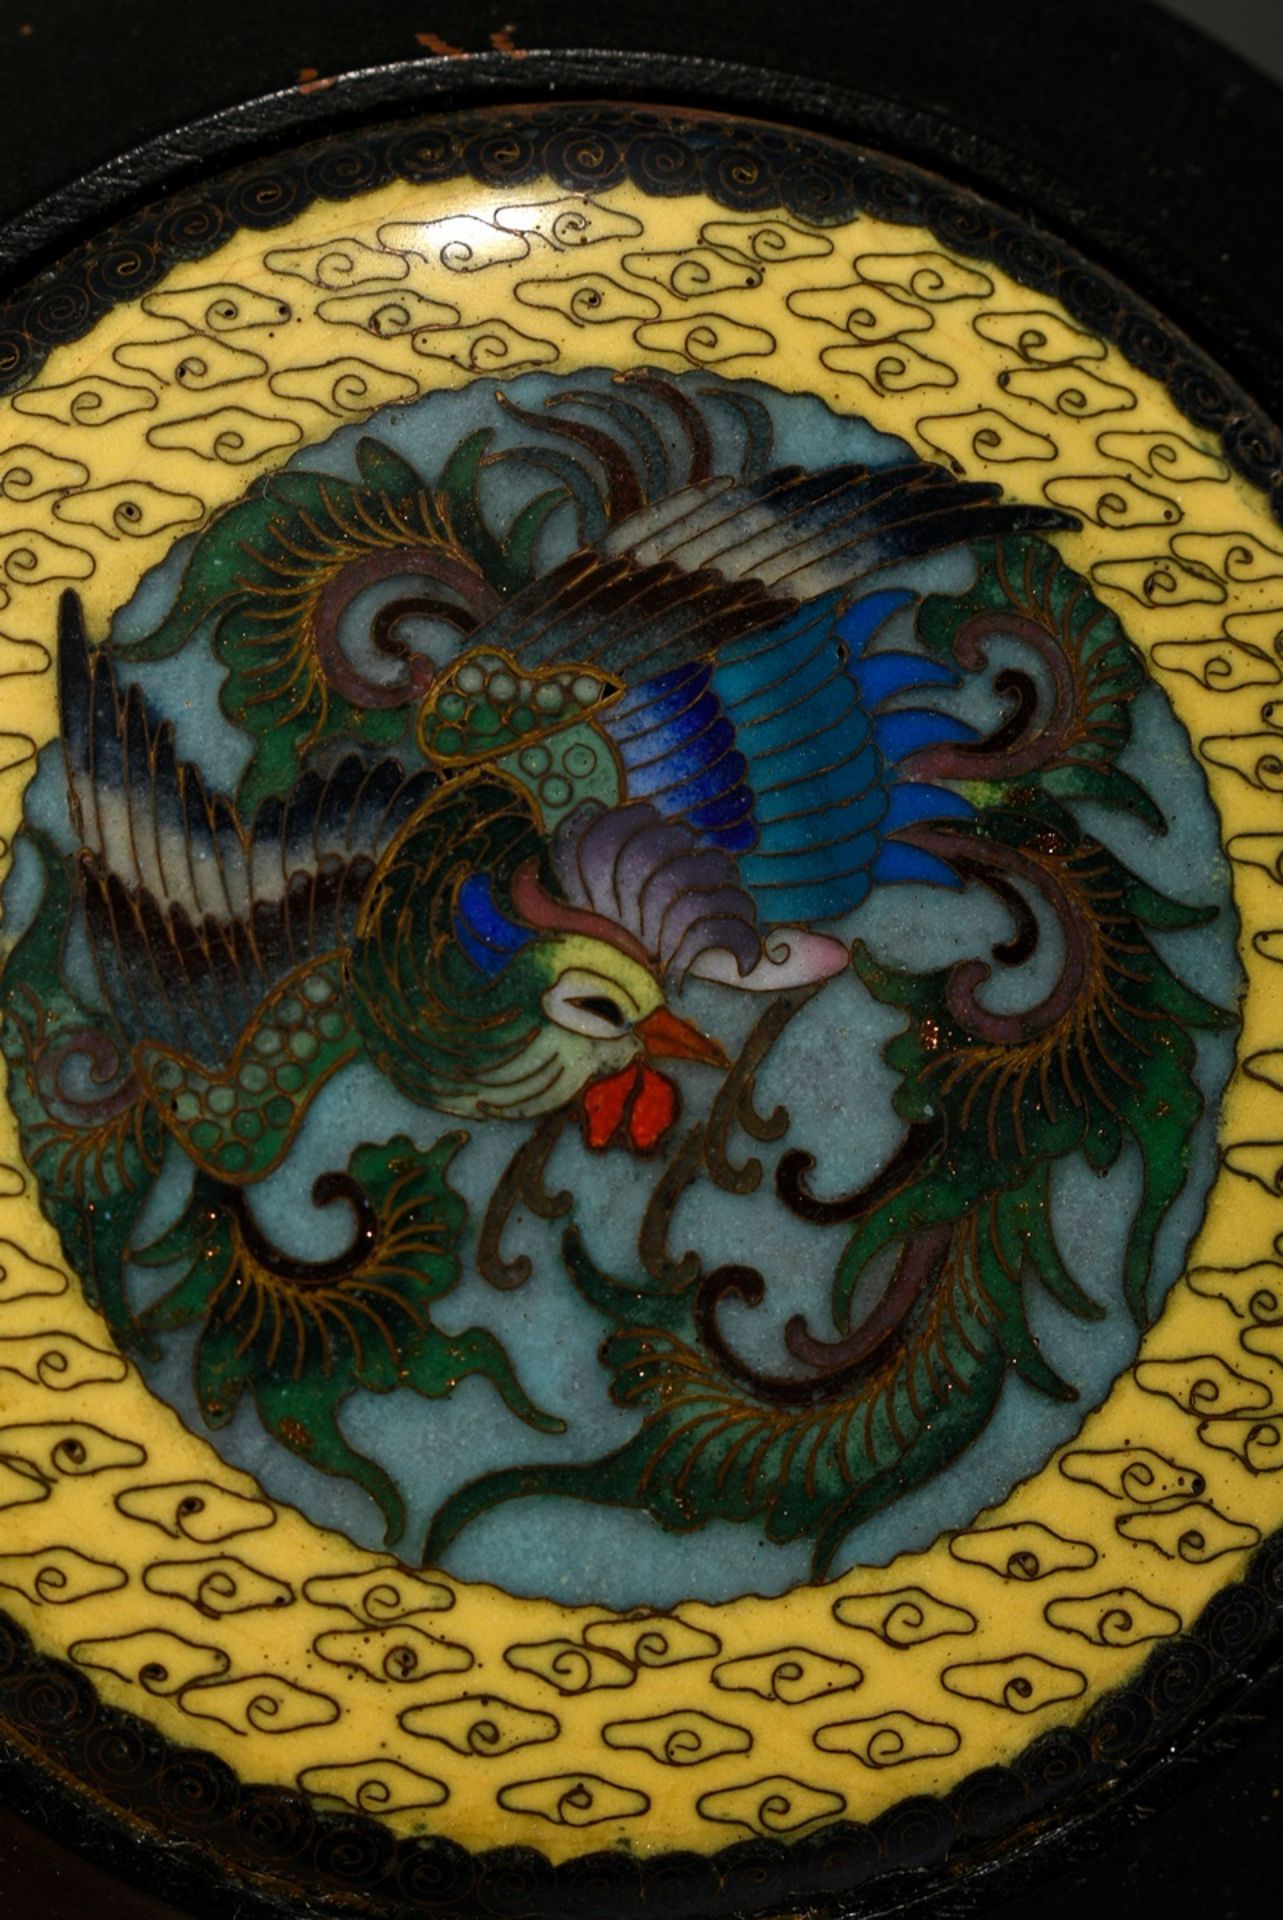 2 Round Cloisonné Tondi "Phoenix" and "Flowers" on yellow cloud background, Japan, c. 1900, Ø 7.5/1 - Image 3 of 4